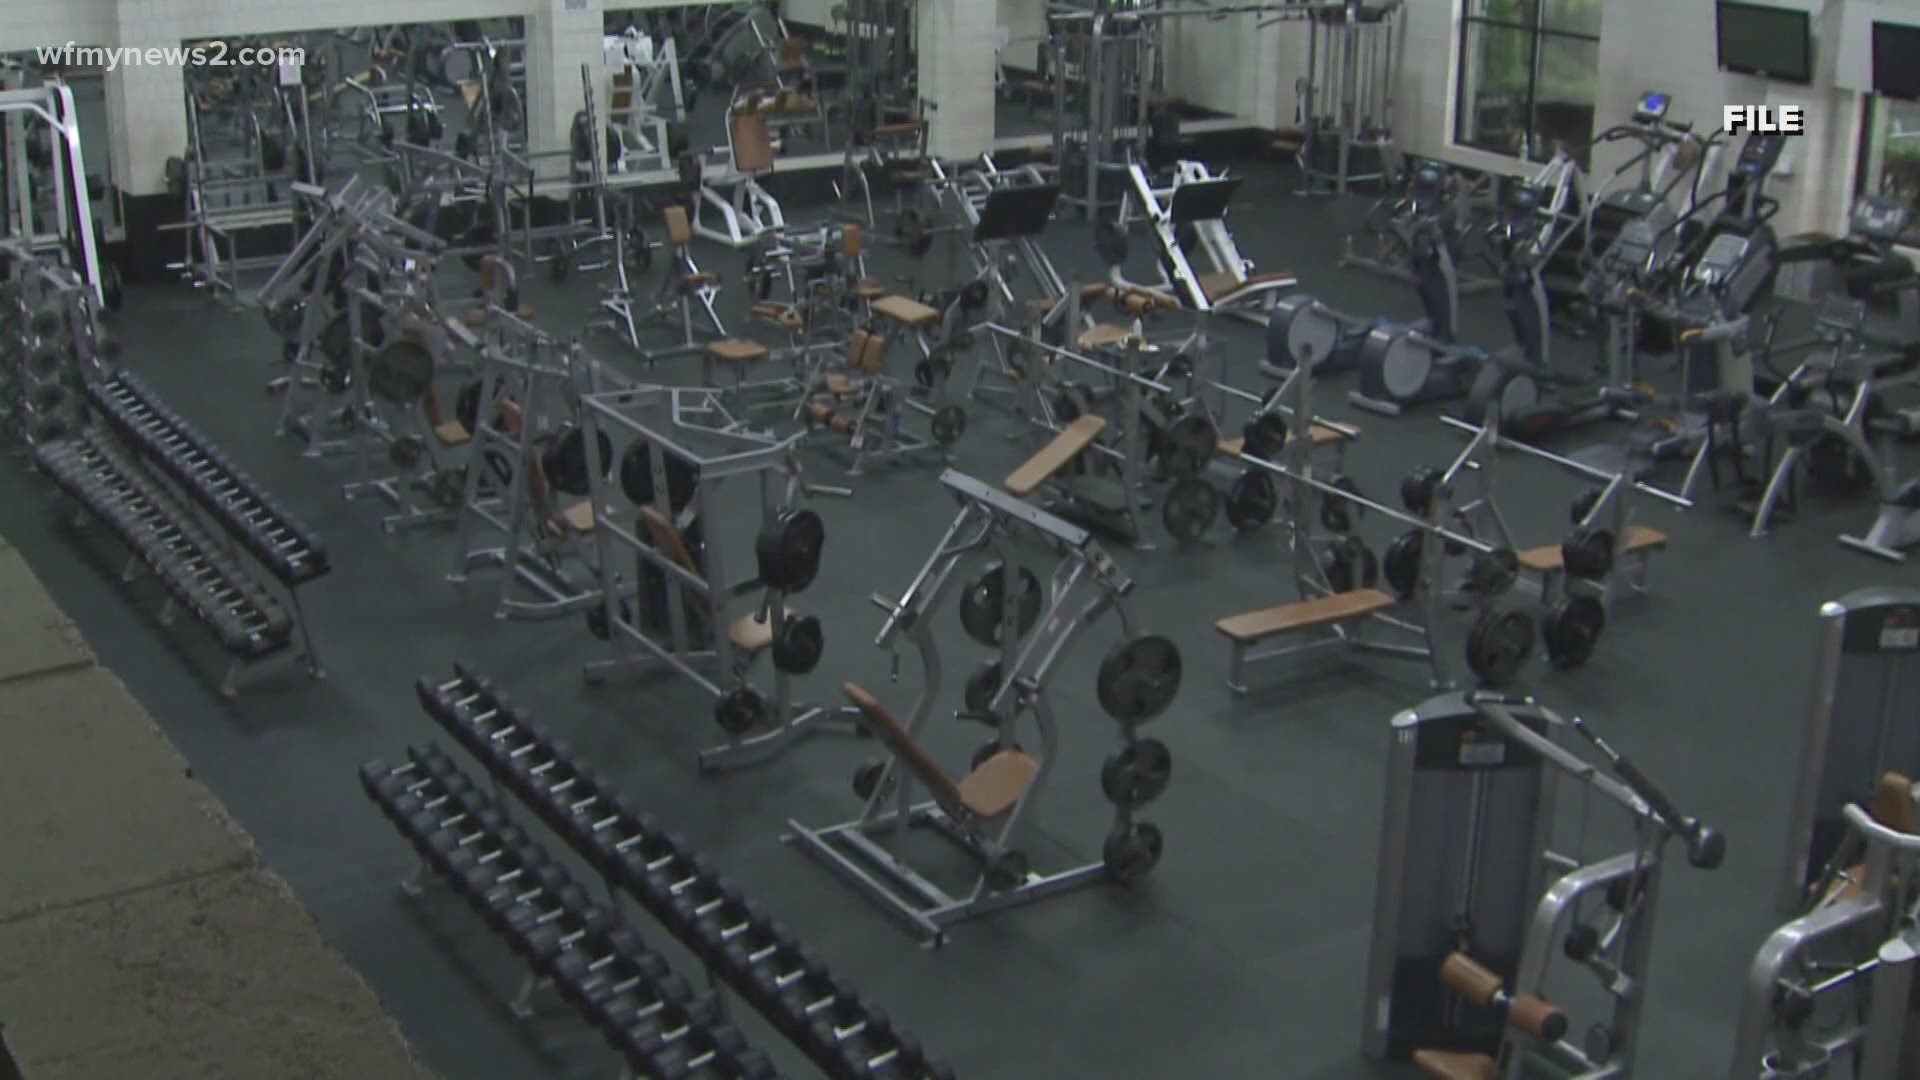 After more than five months, North Carolina gyms got the good news they've been waiting for.